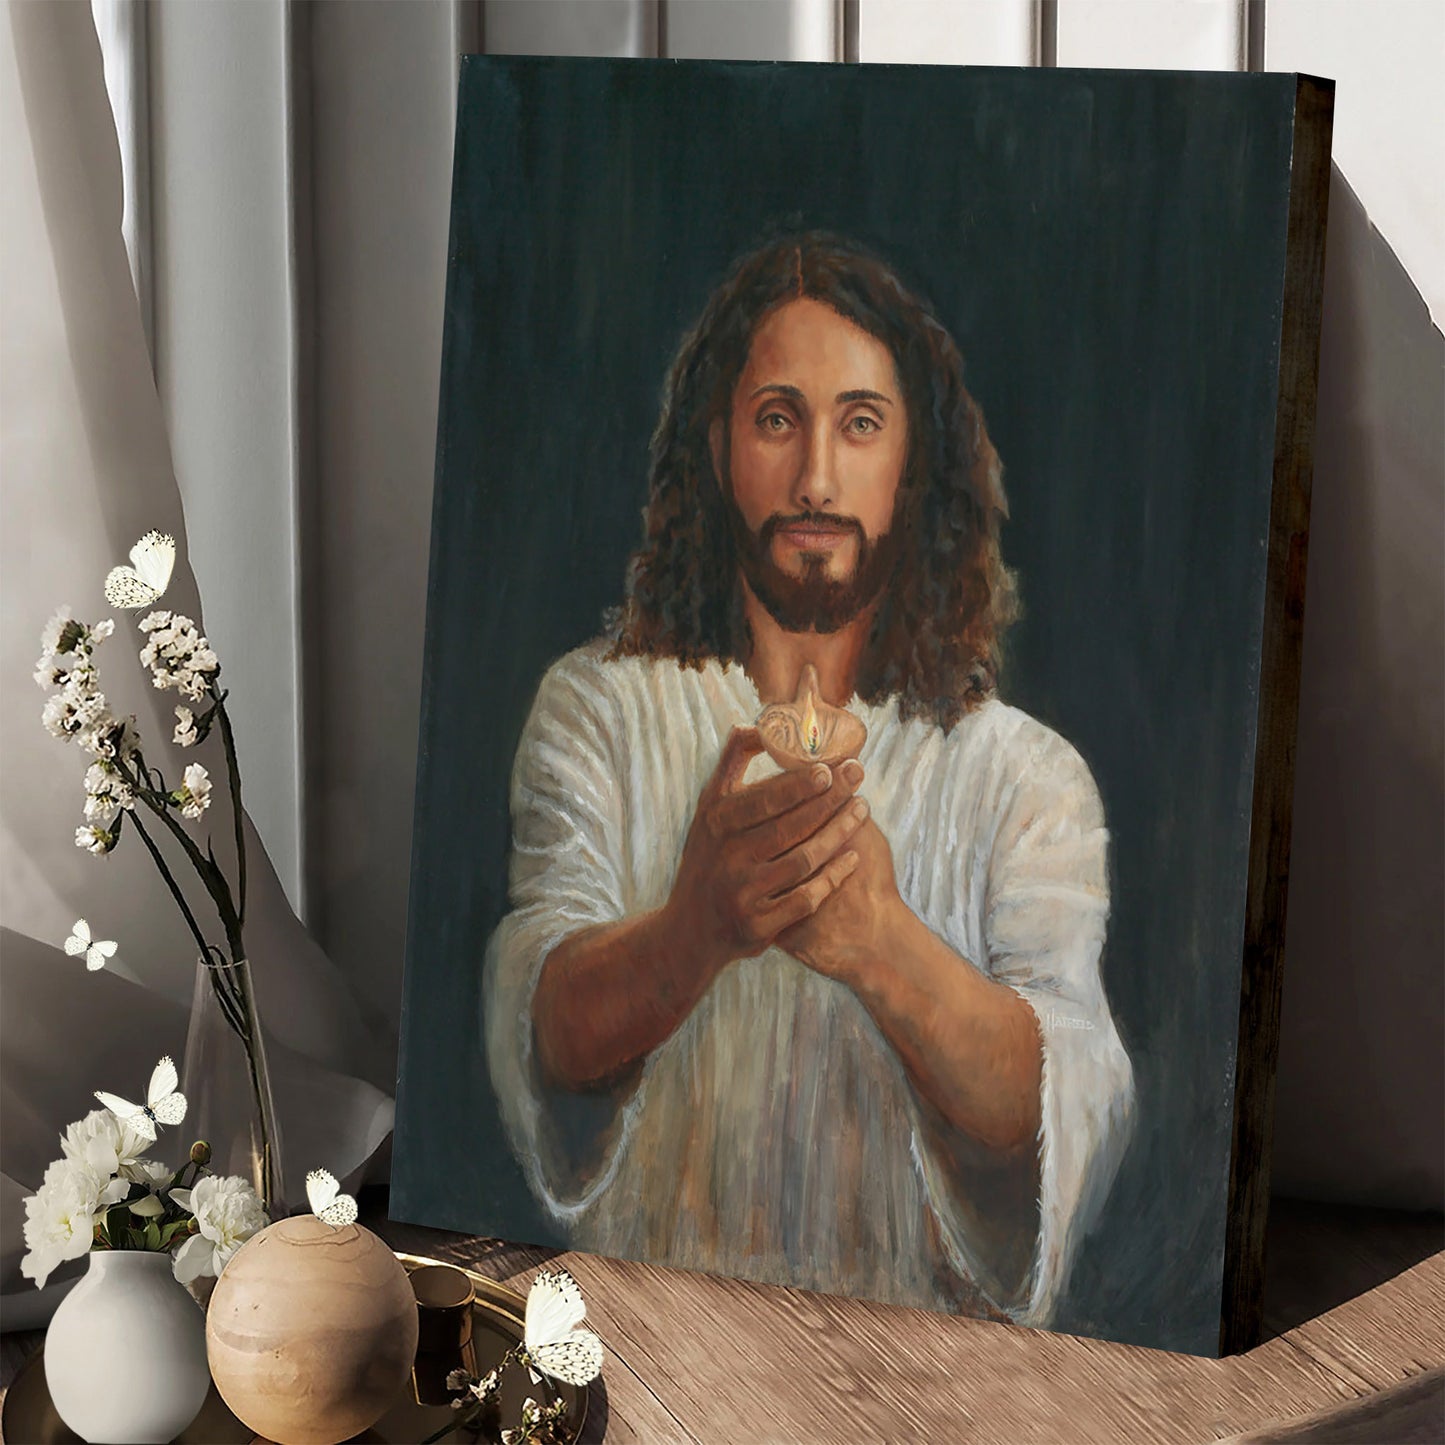 The Bridegroom Canvas Wall Art - Jesus Canvas Pictures - Christian Canvas Wall Art